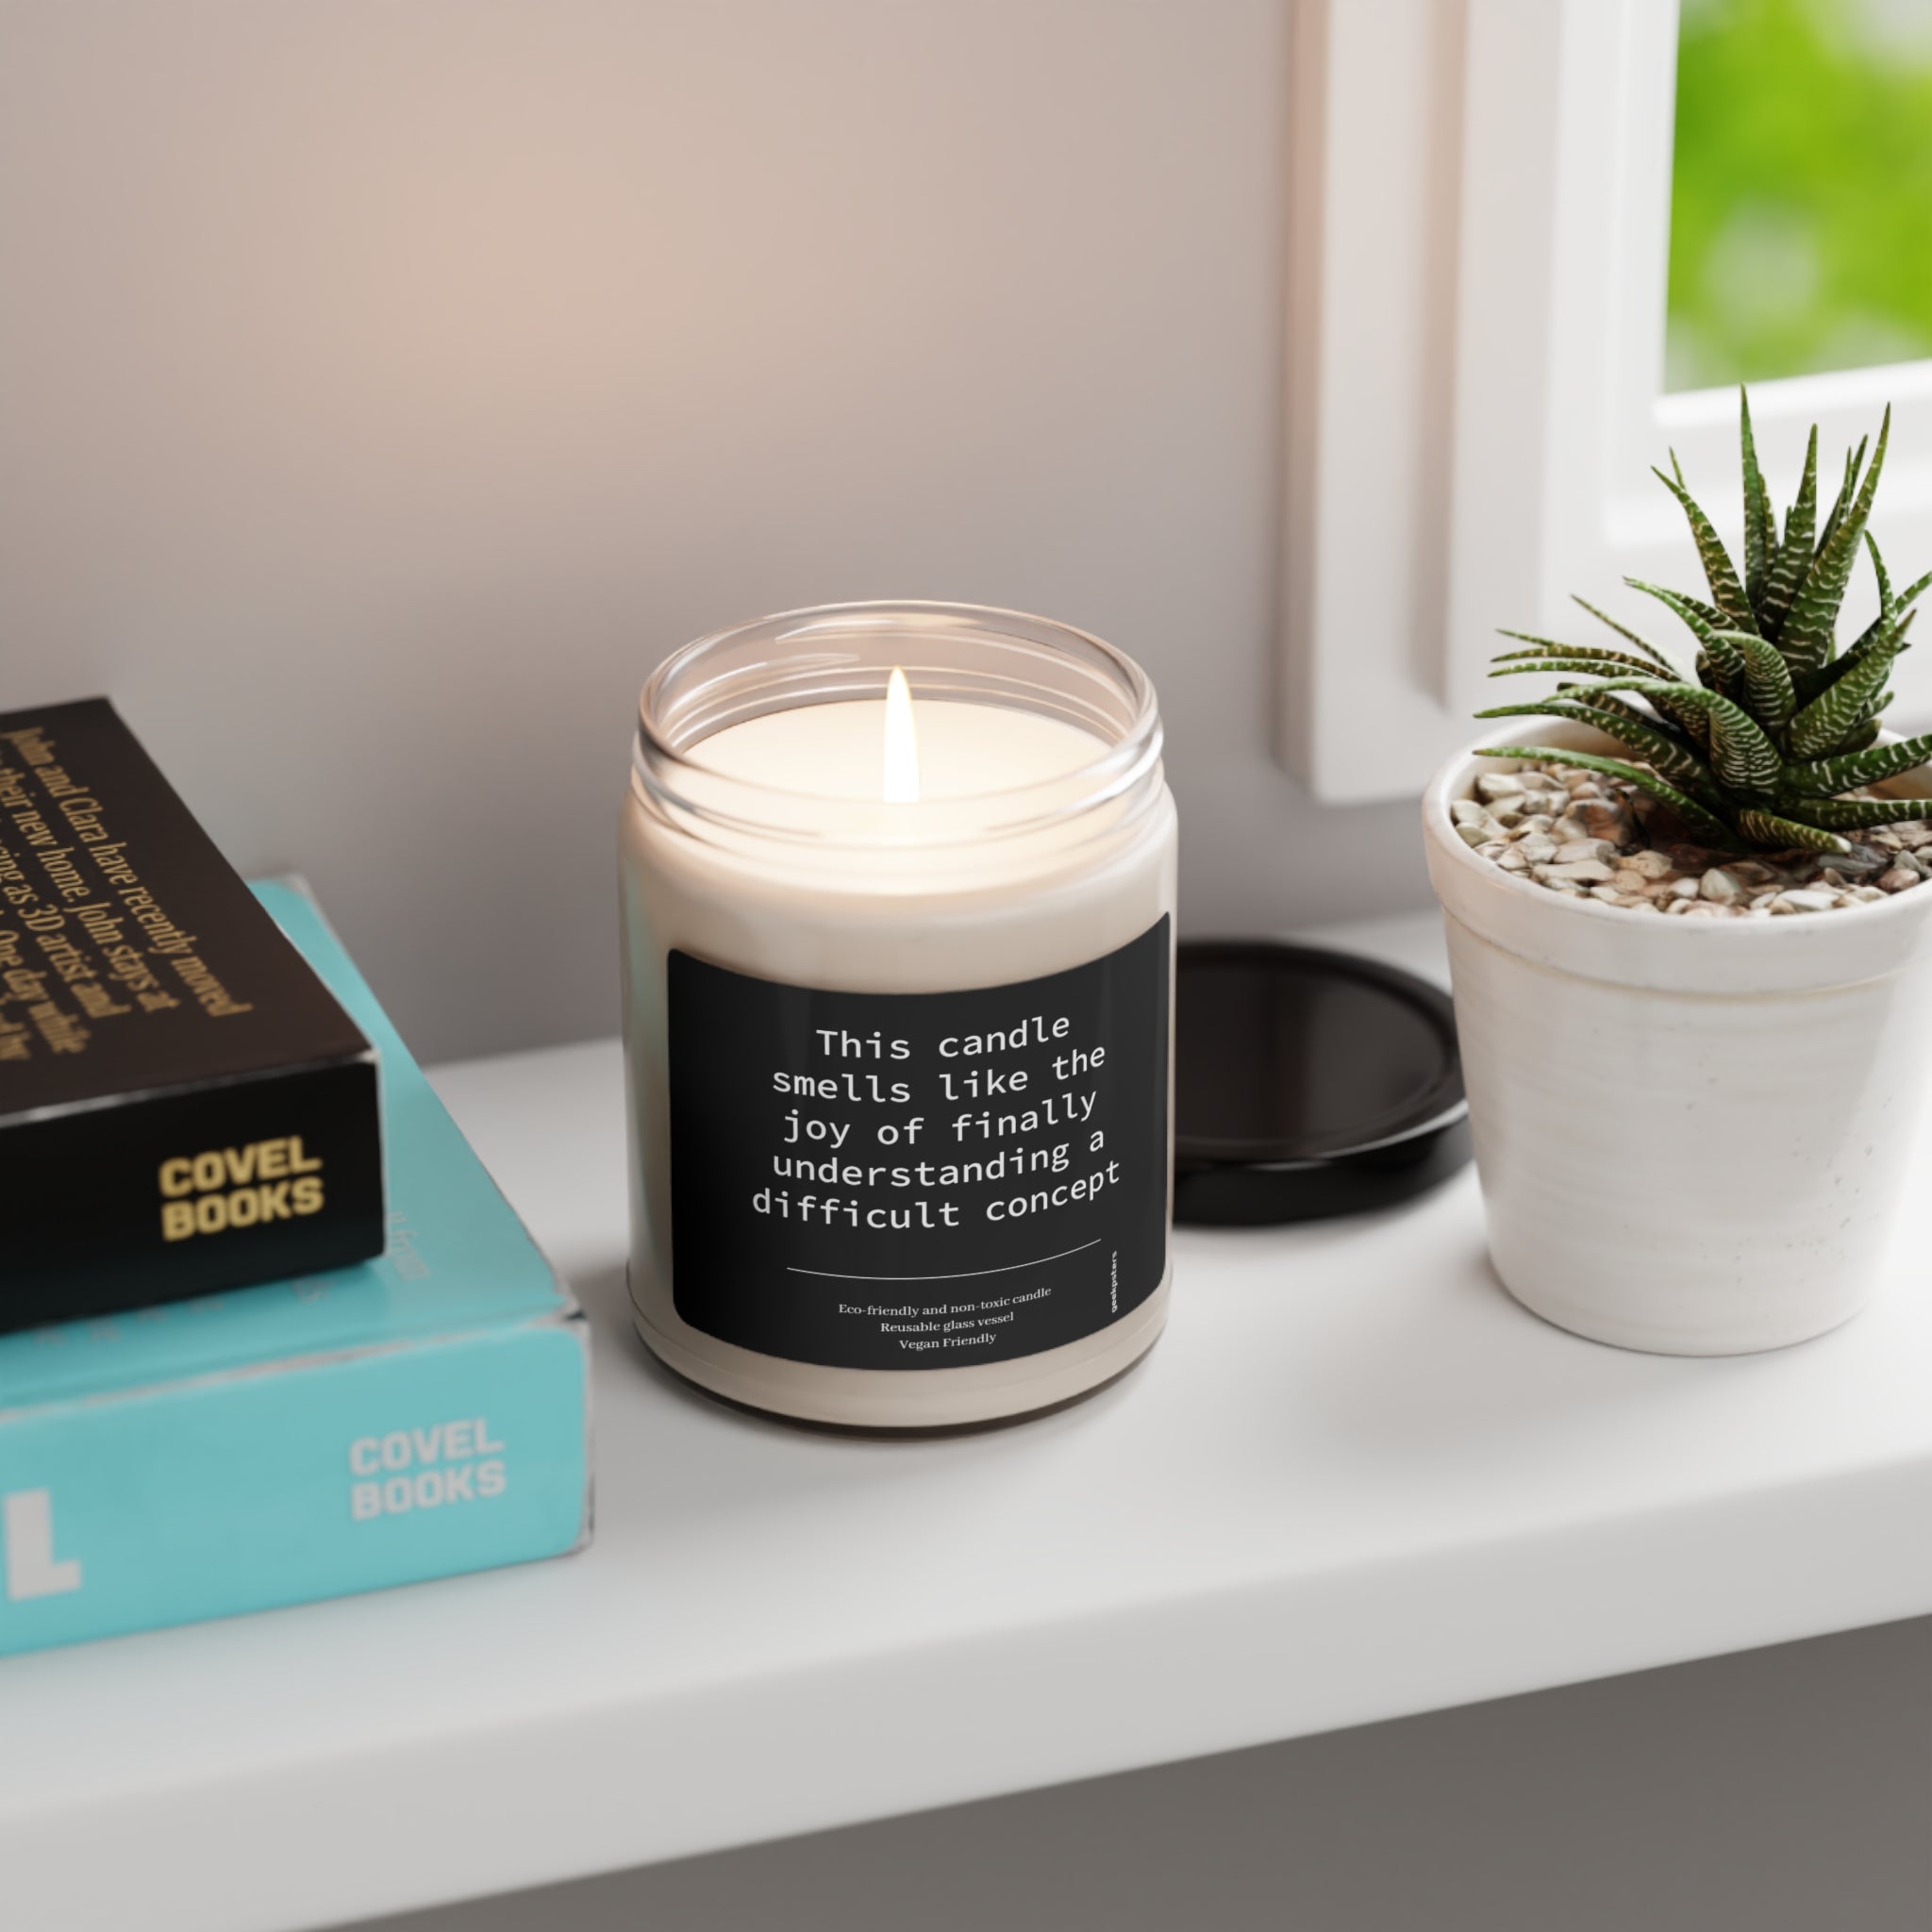 A lit "This Candle Smells Like the Joy of Finally Understanding a Difficult Concept" soy candle with a label next to books and a potted succulent on a windowsill.